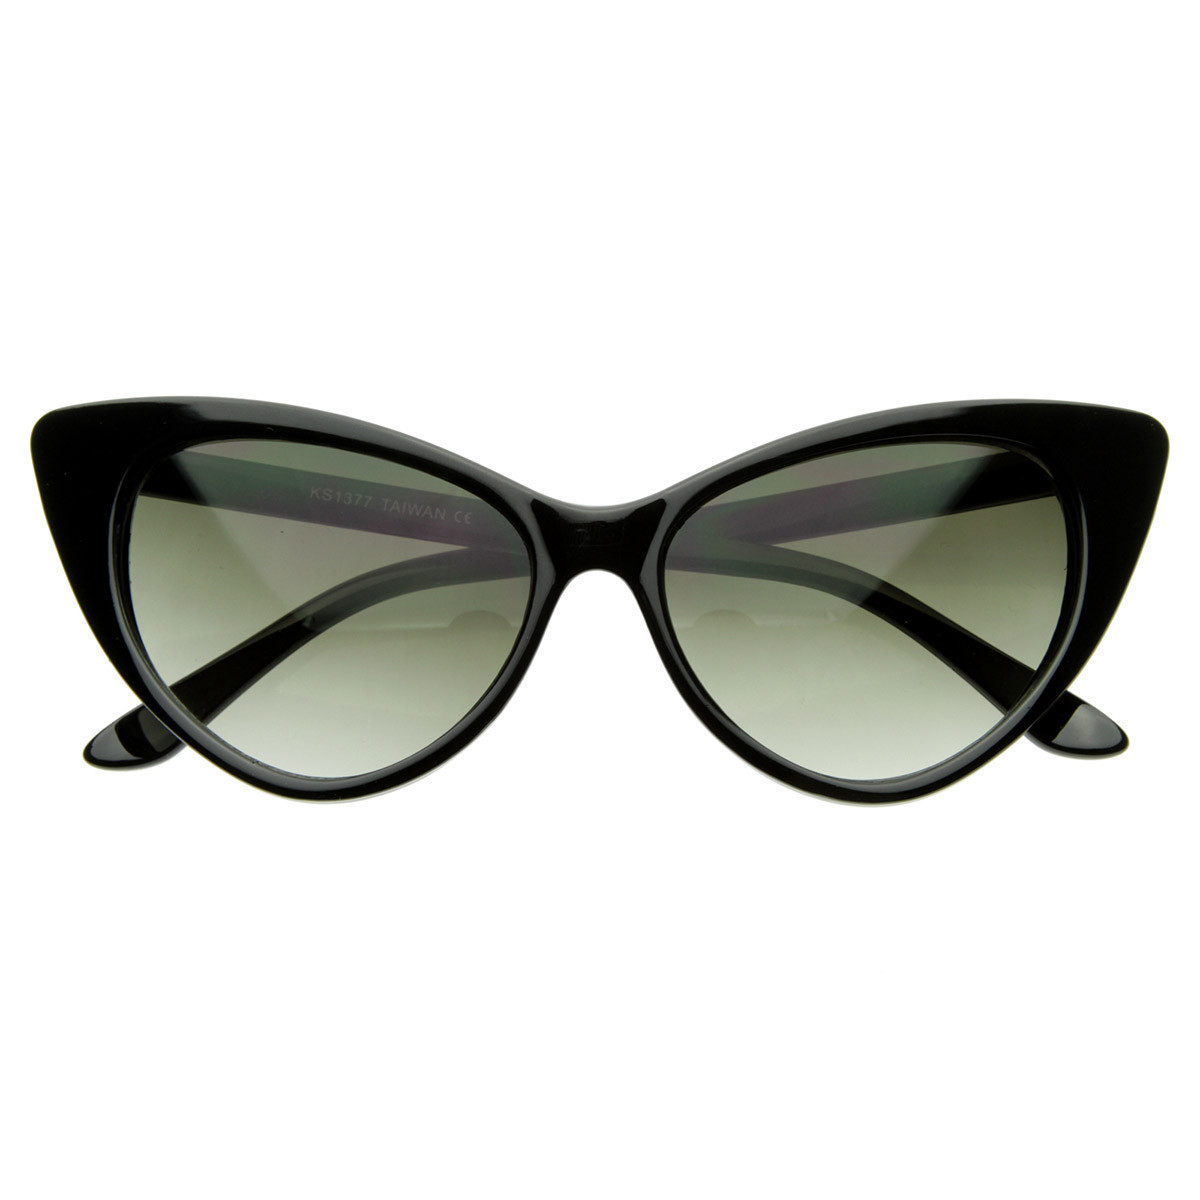 Super Cateyes Vintage Inspired Fashion Mod Chic High Pointed Cat-Eye Sunglasses - 8371 - Black-Fade